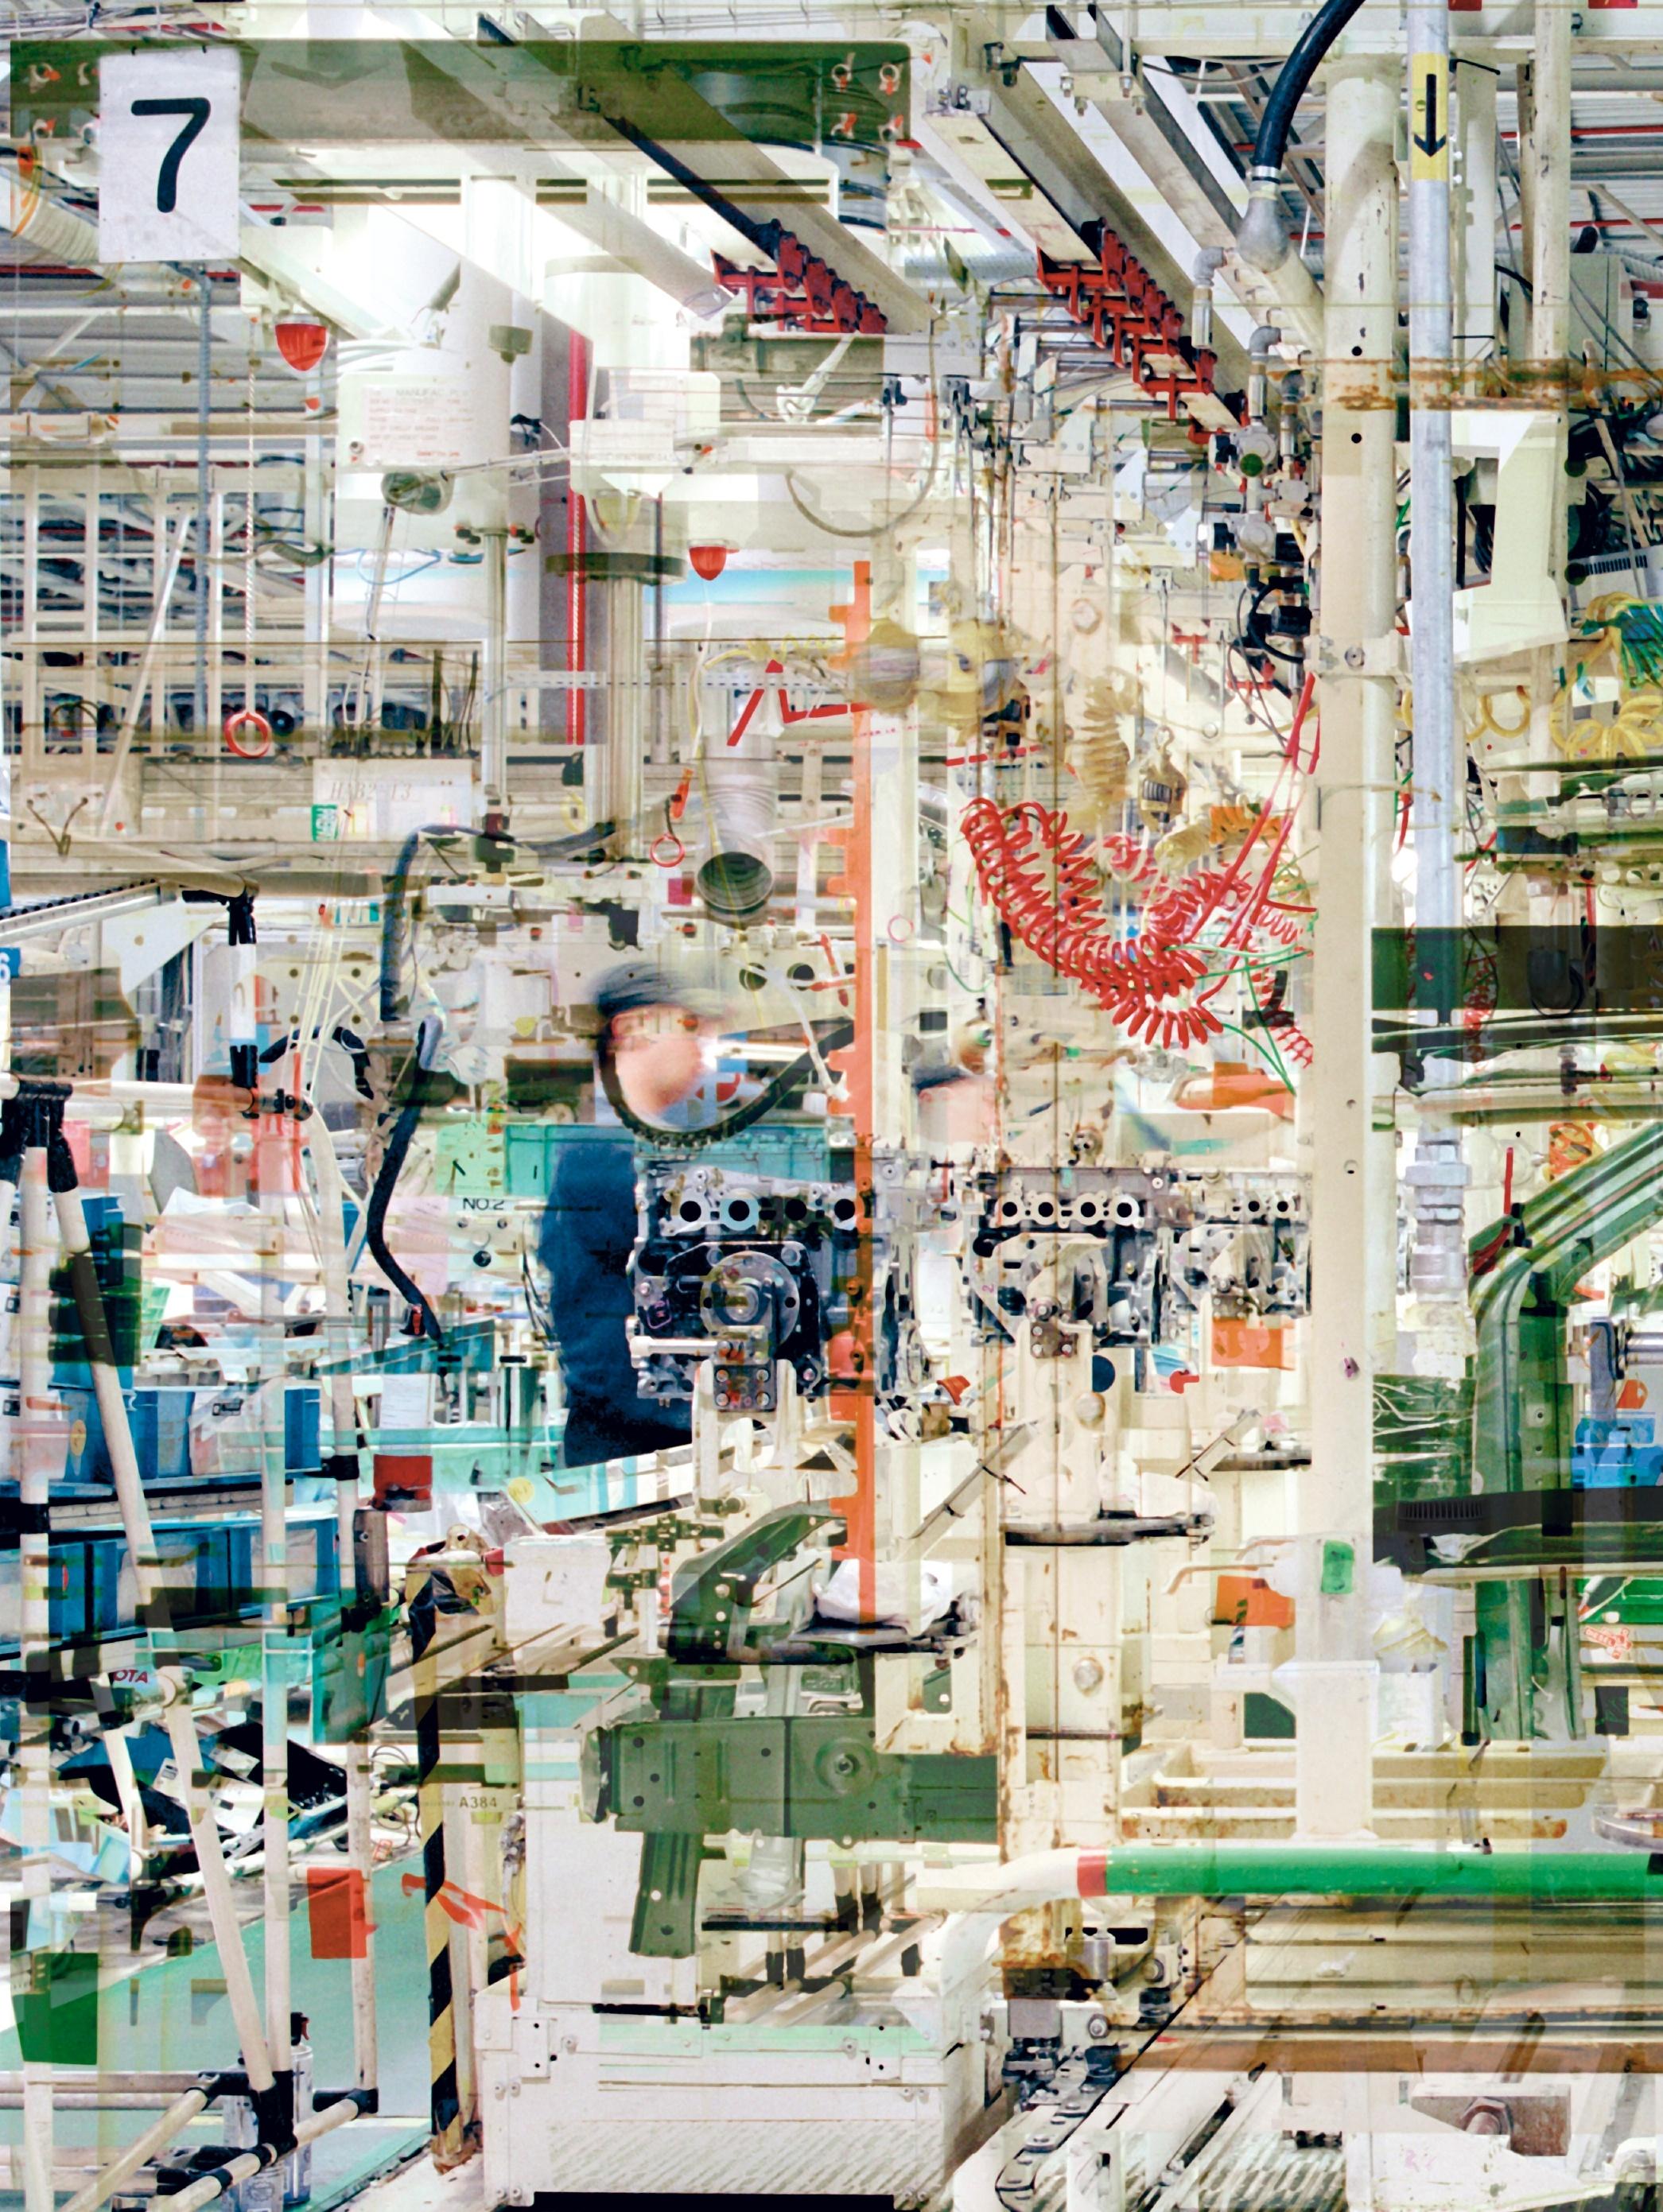 SStéphane COUTURIER (*1957, France)
Usine Toyota n°1 (Valenciennes), 2005
C-Print with Diasec Face in Artist's Frame
Sheet 182 x 240.5 cm (71 5/8 x 94 5/8 in.)
Frame 189 x 247.5 cm (74 3/8 x 97 1/2 in.)
Edition of 5; Ed. no. 2/5
Framed

Born in 1957